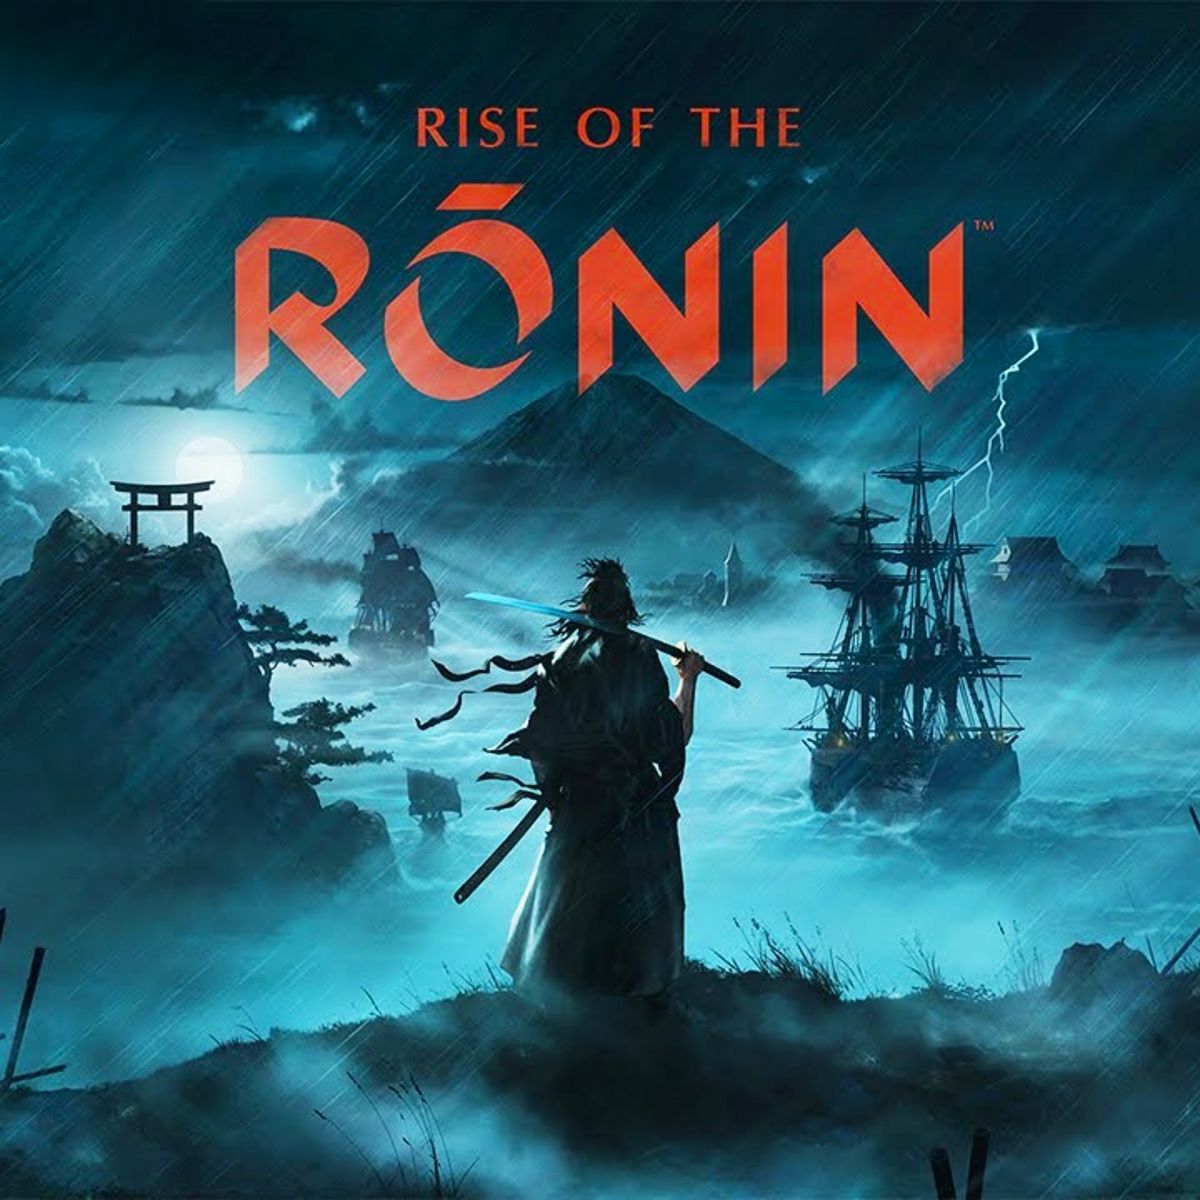 Rise of the Ronin - IGN